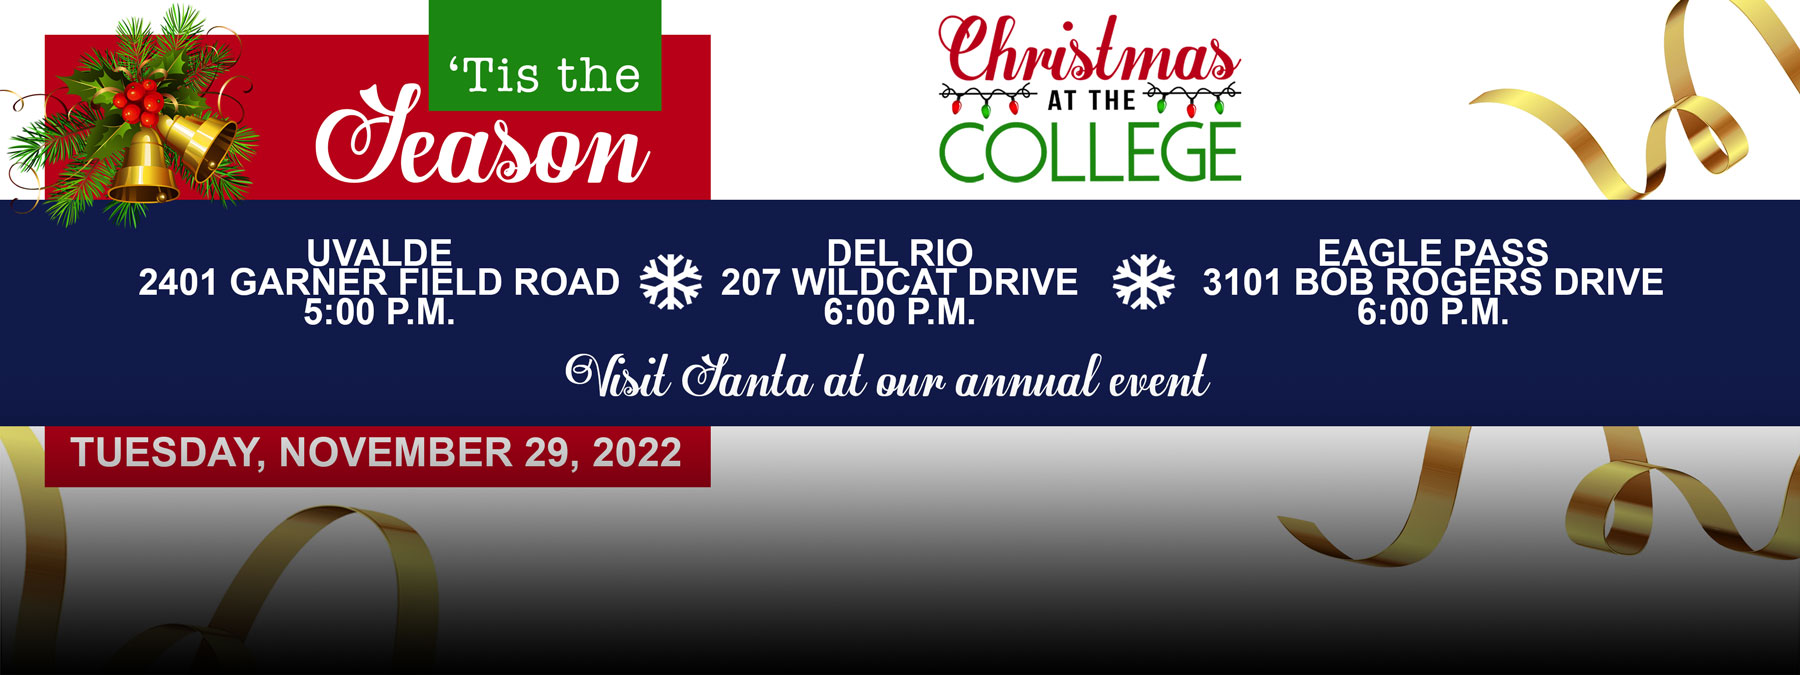 Christmas at the College: November 29, 2022 in Uvalde at 5 pm, Del Rio and Eagle Pass at 6 pm.